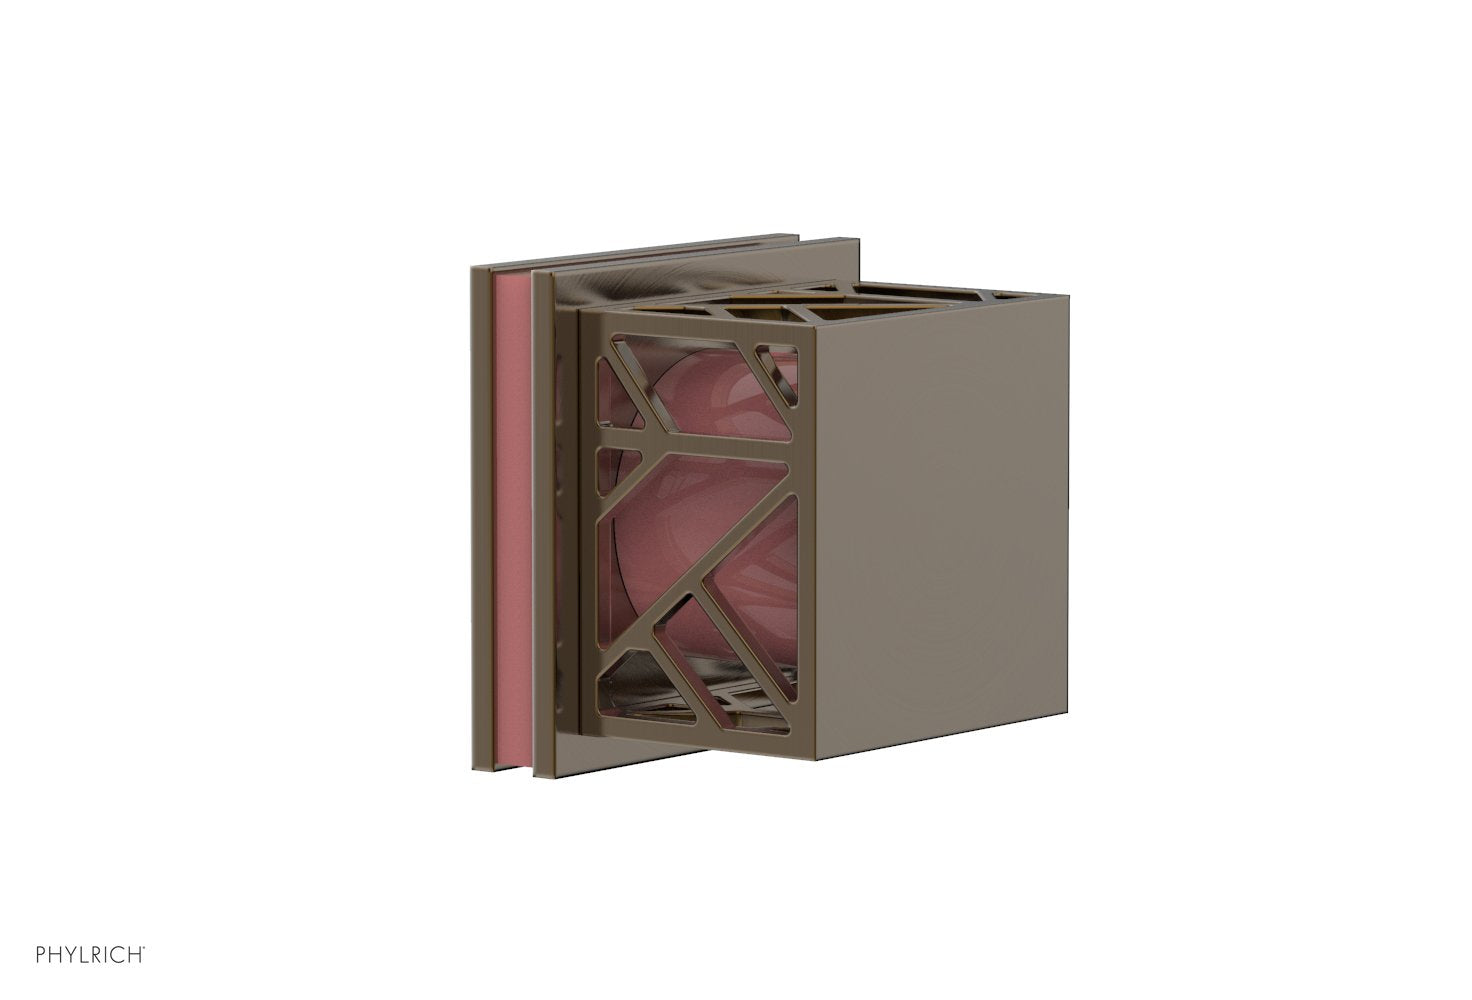 Phylrich JOLIE Volume Control/Diverter Trim - Square Handle with "Pink" Accents